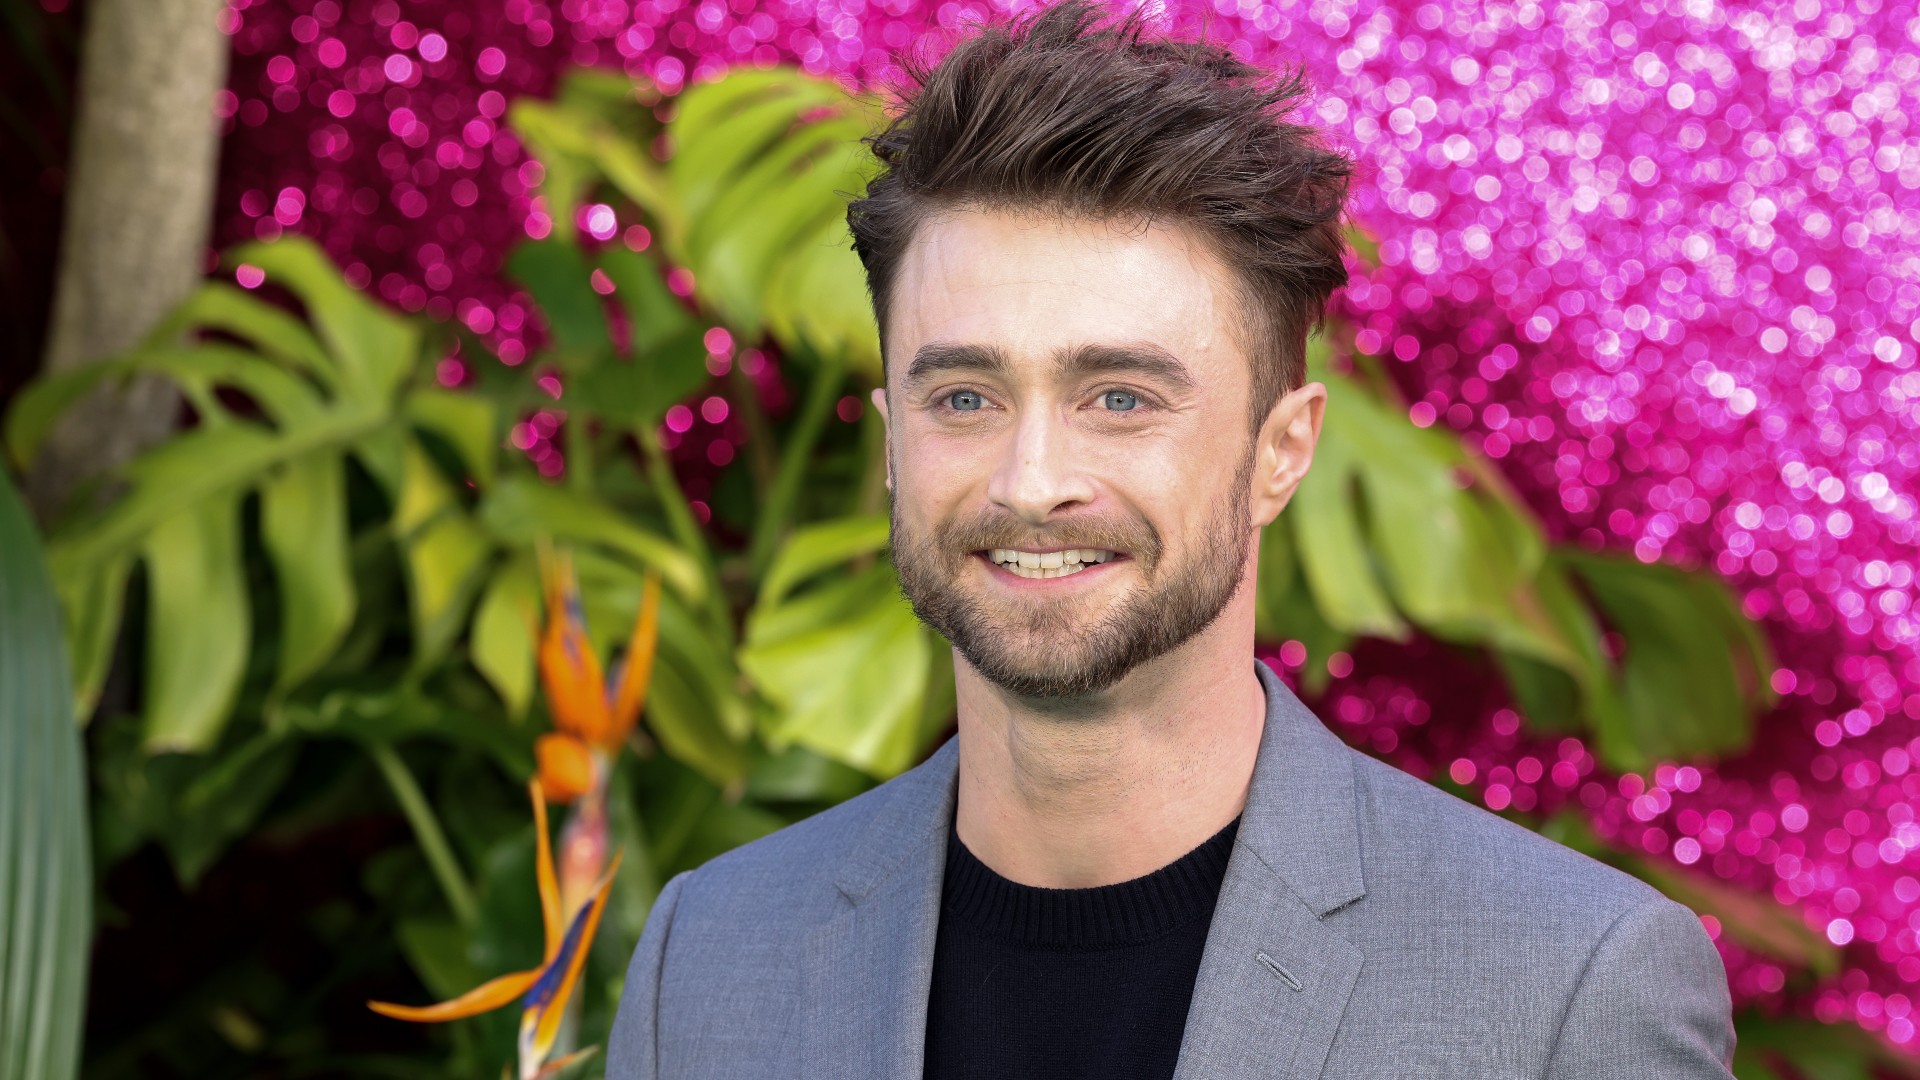 7 Times Daniel Radcliffe Really Showed His Range